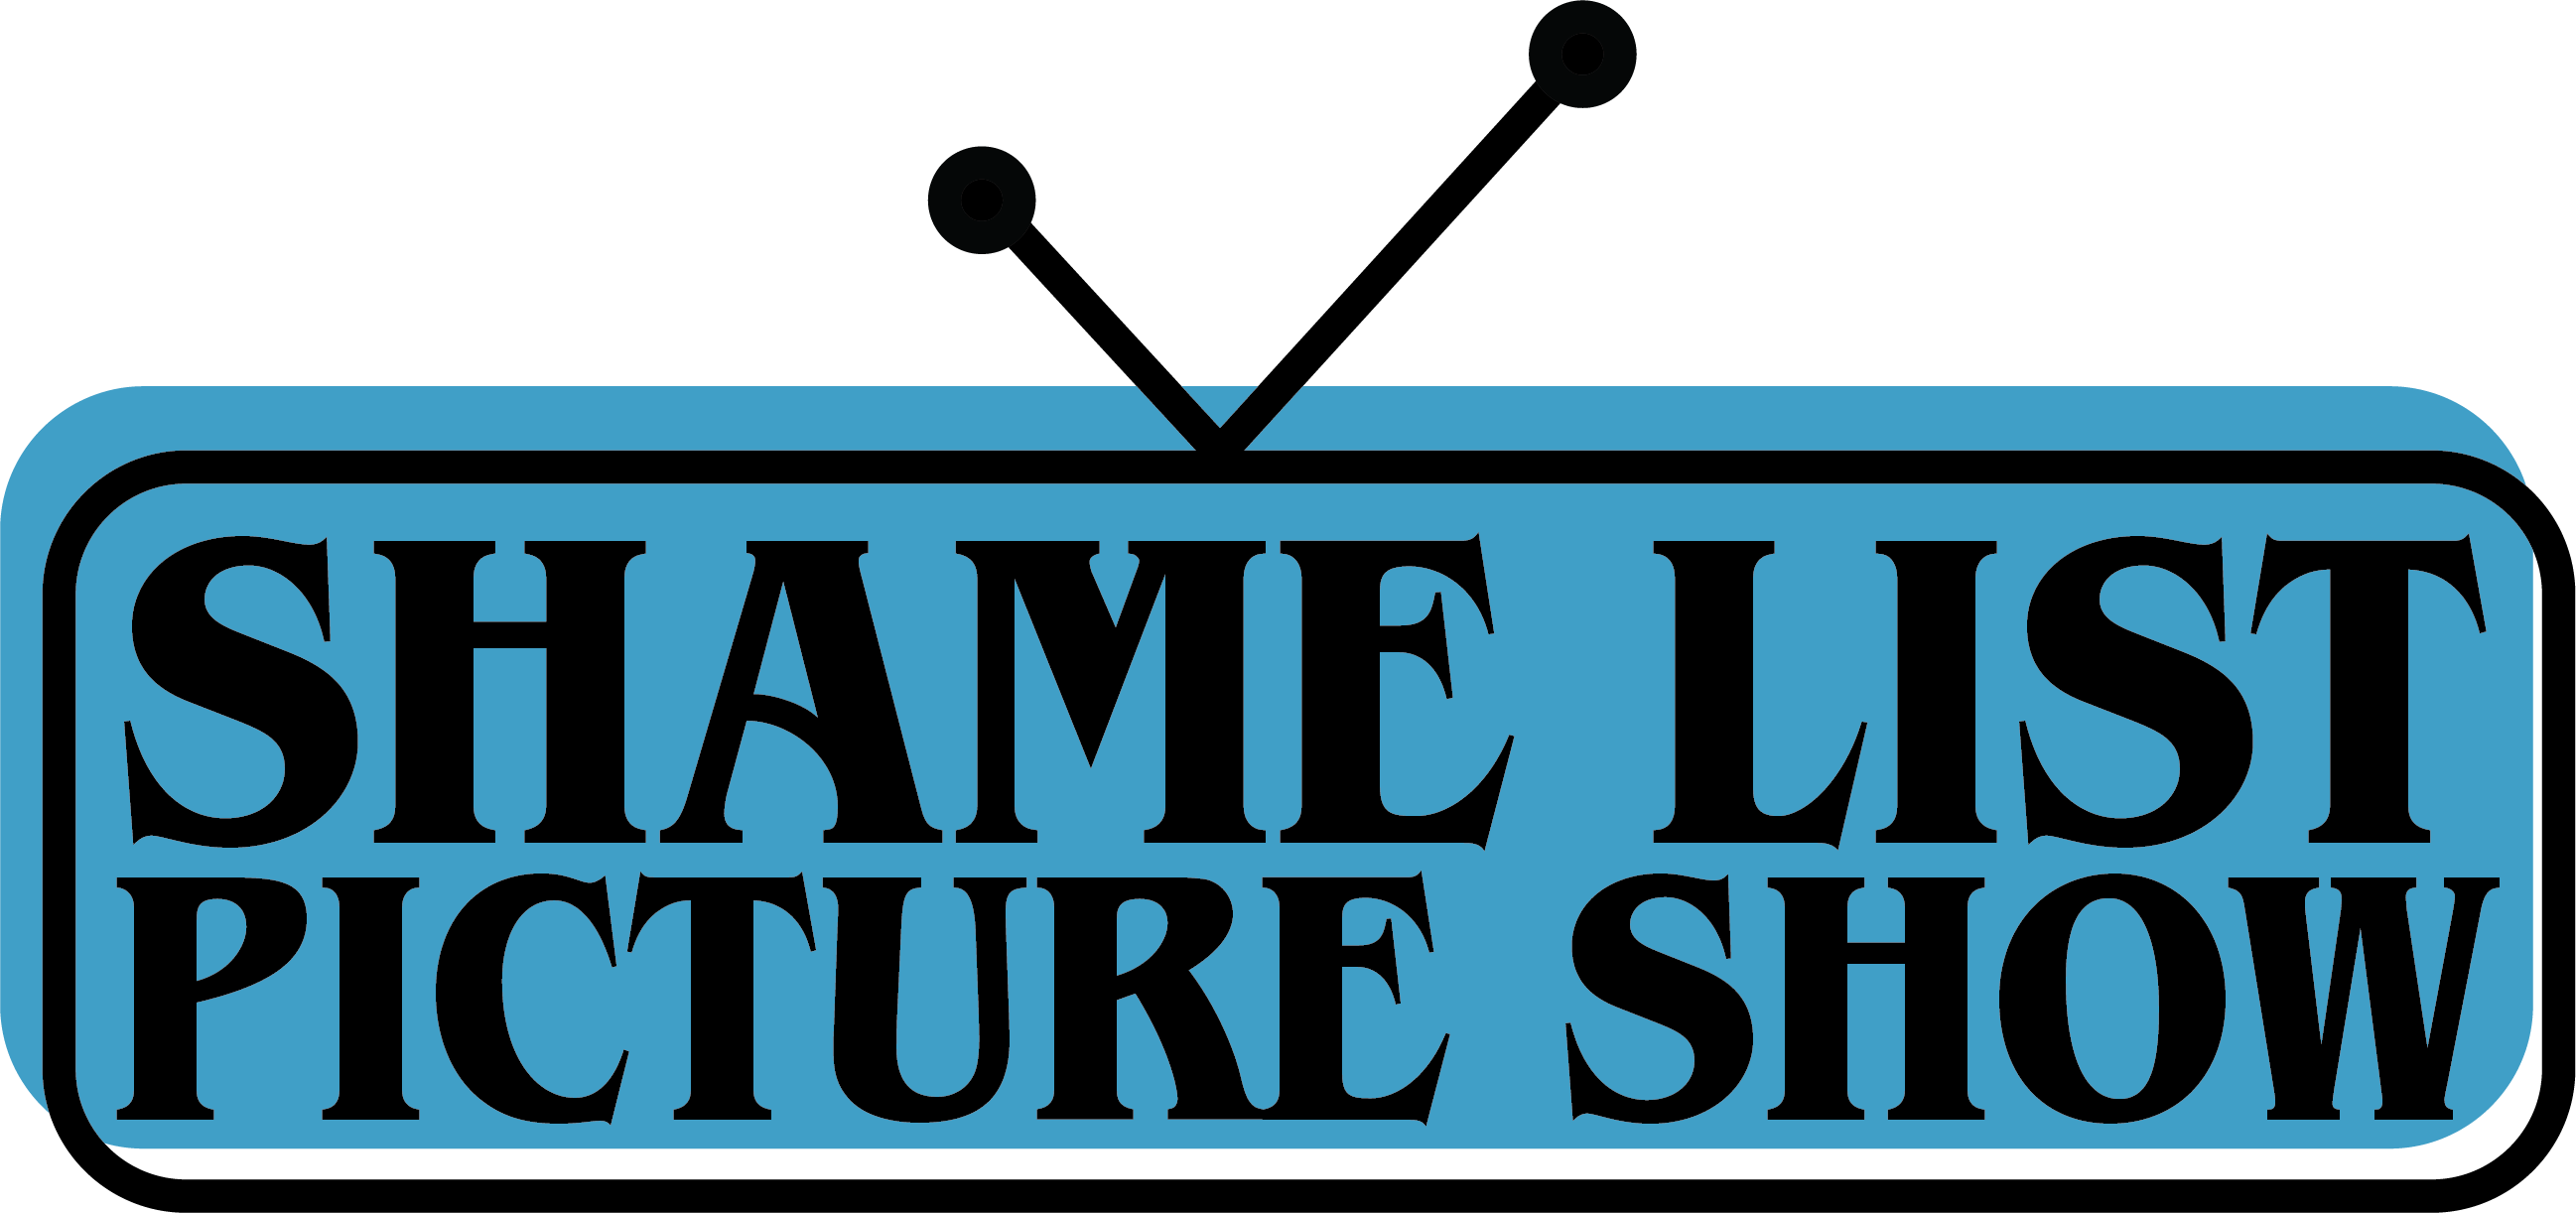 Black logo that says 'Shame List Picture Show' with the shape of a TV around it. A light blue rectangle after it.